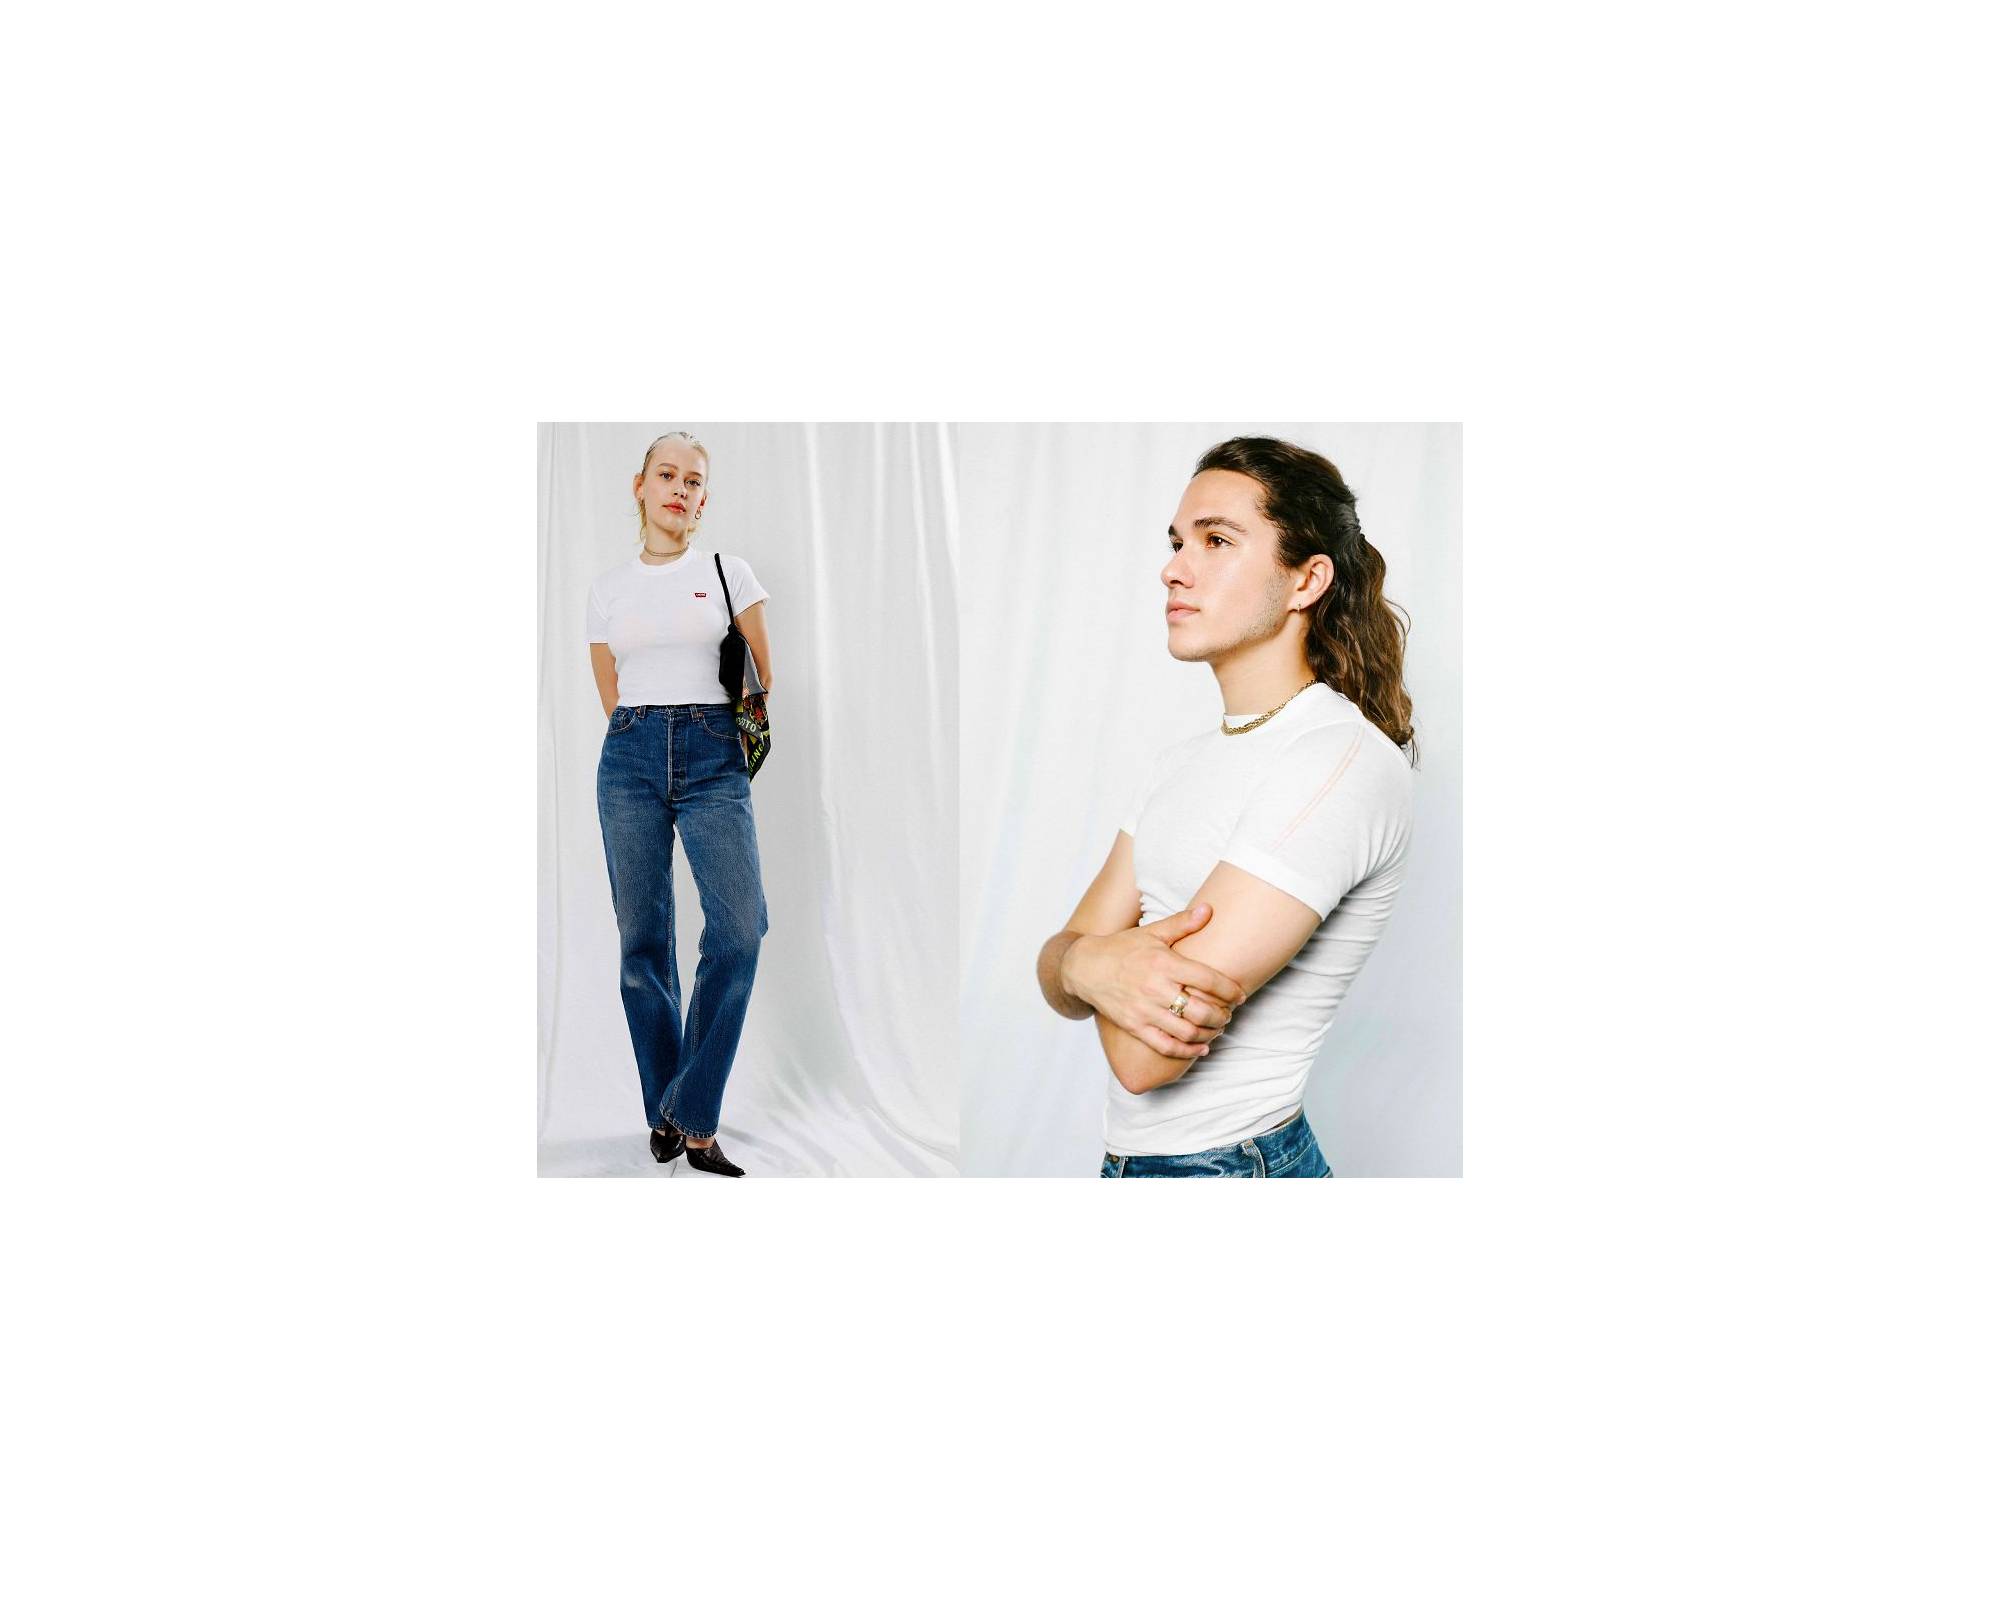 Jared Ellner and woman standing wearing white tee and jeans.